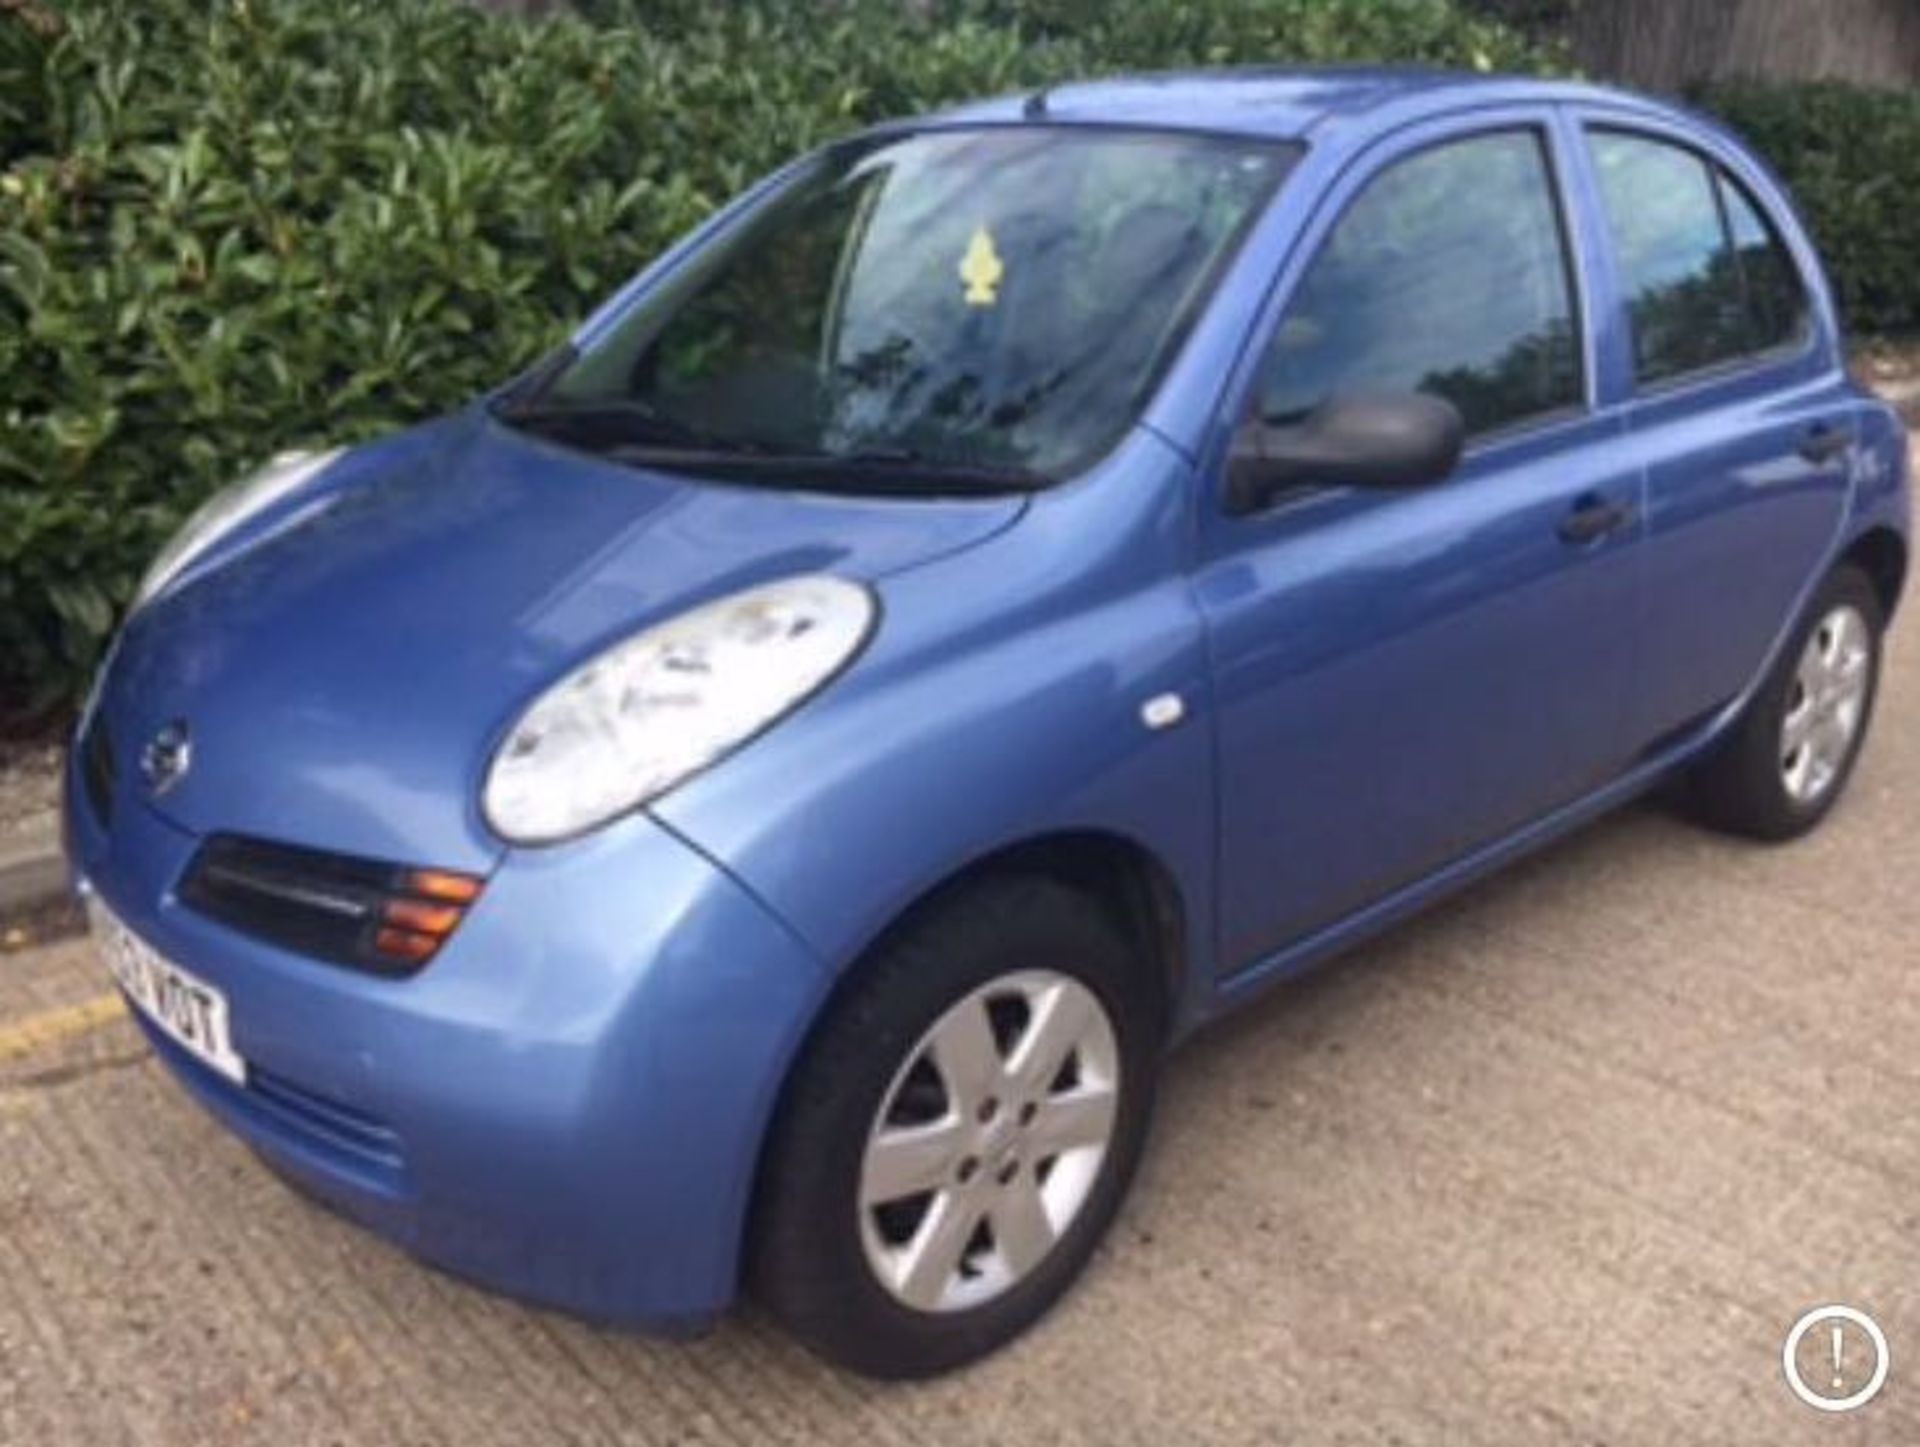 NISSAN MICRA 1.2s - Image 2 of 12